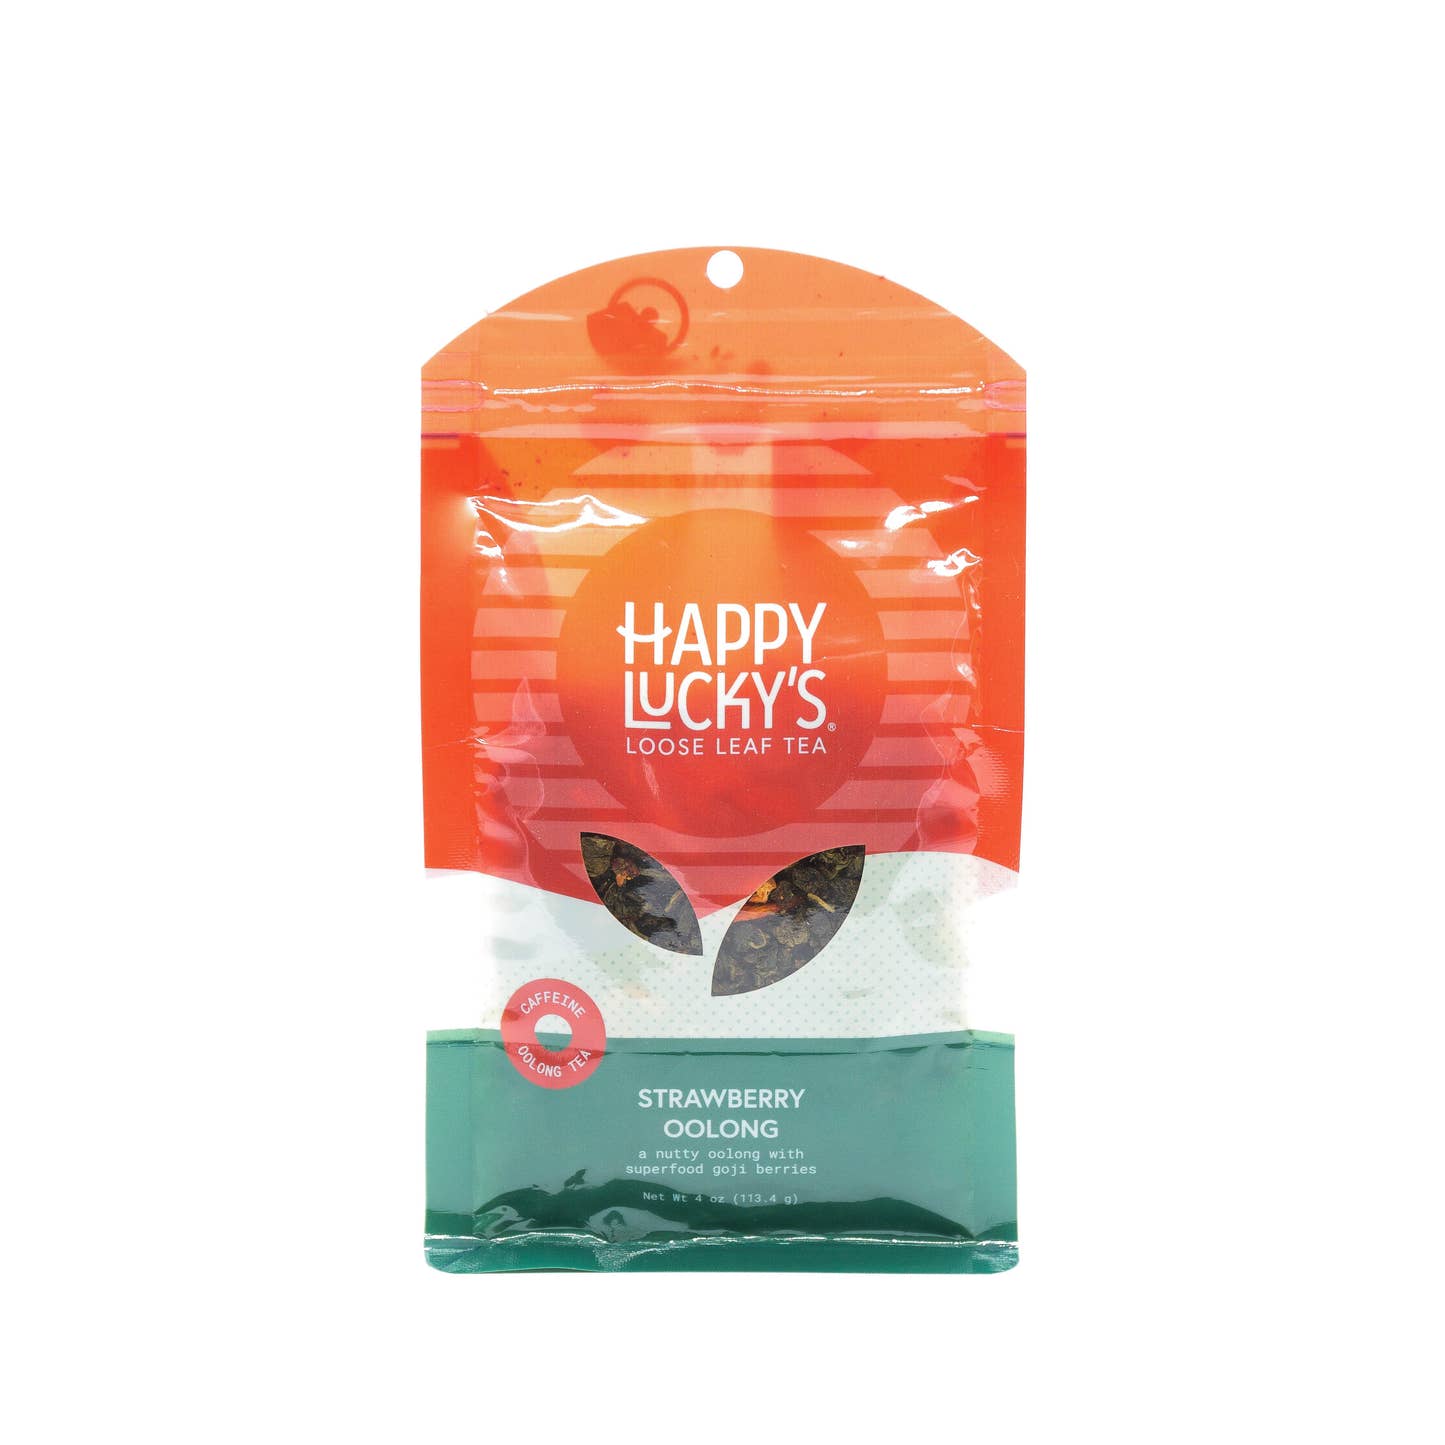 Shop Strawberry Oolong Tea by Happy Lucky's at Sips by